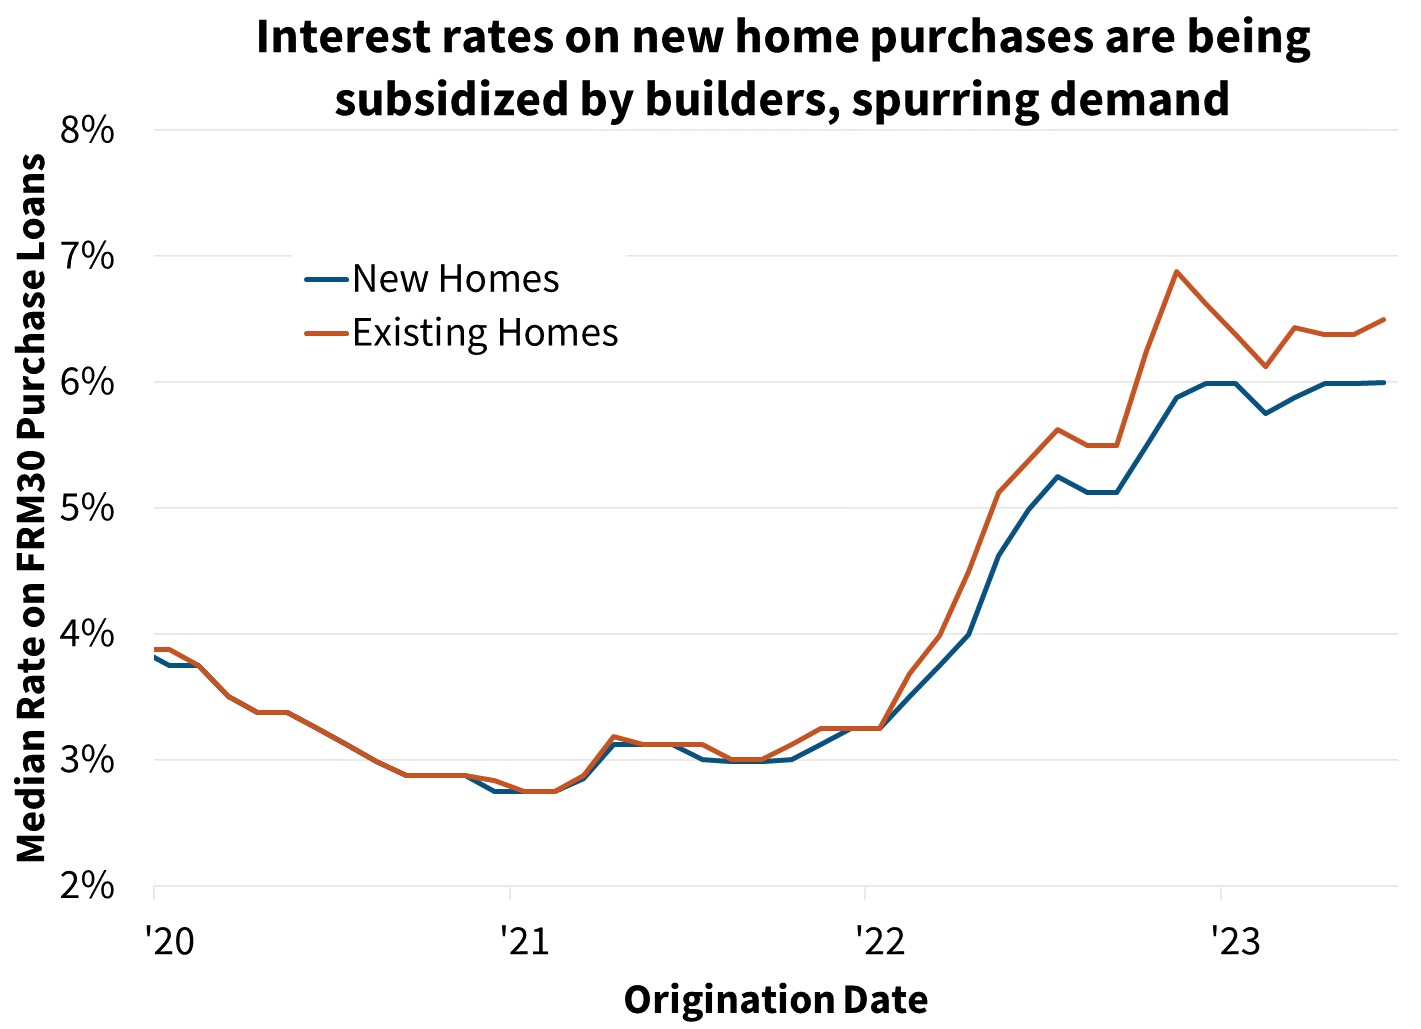 Interest rates on new home purchases are being subsidized by builders, spurring demand 